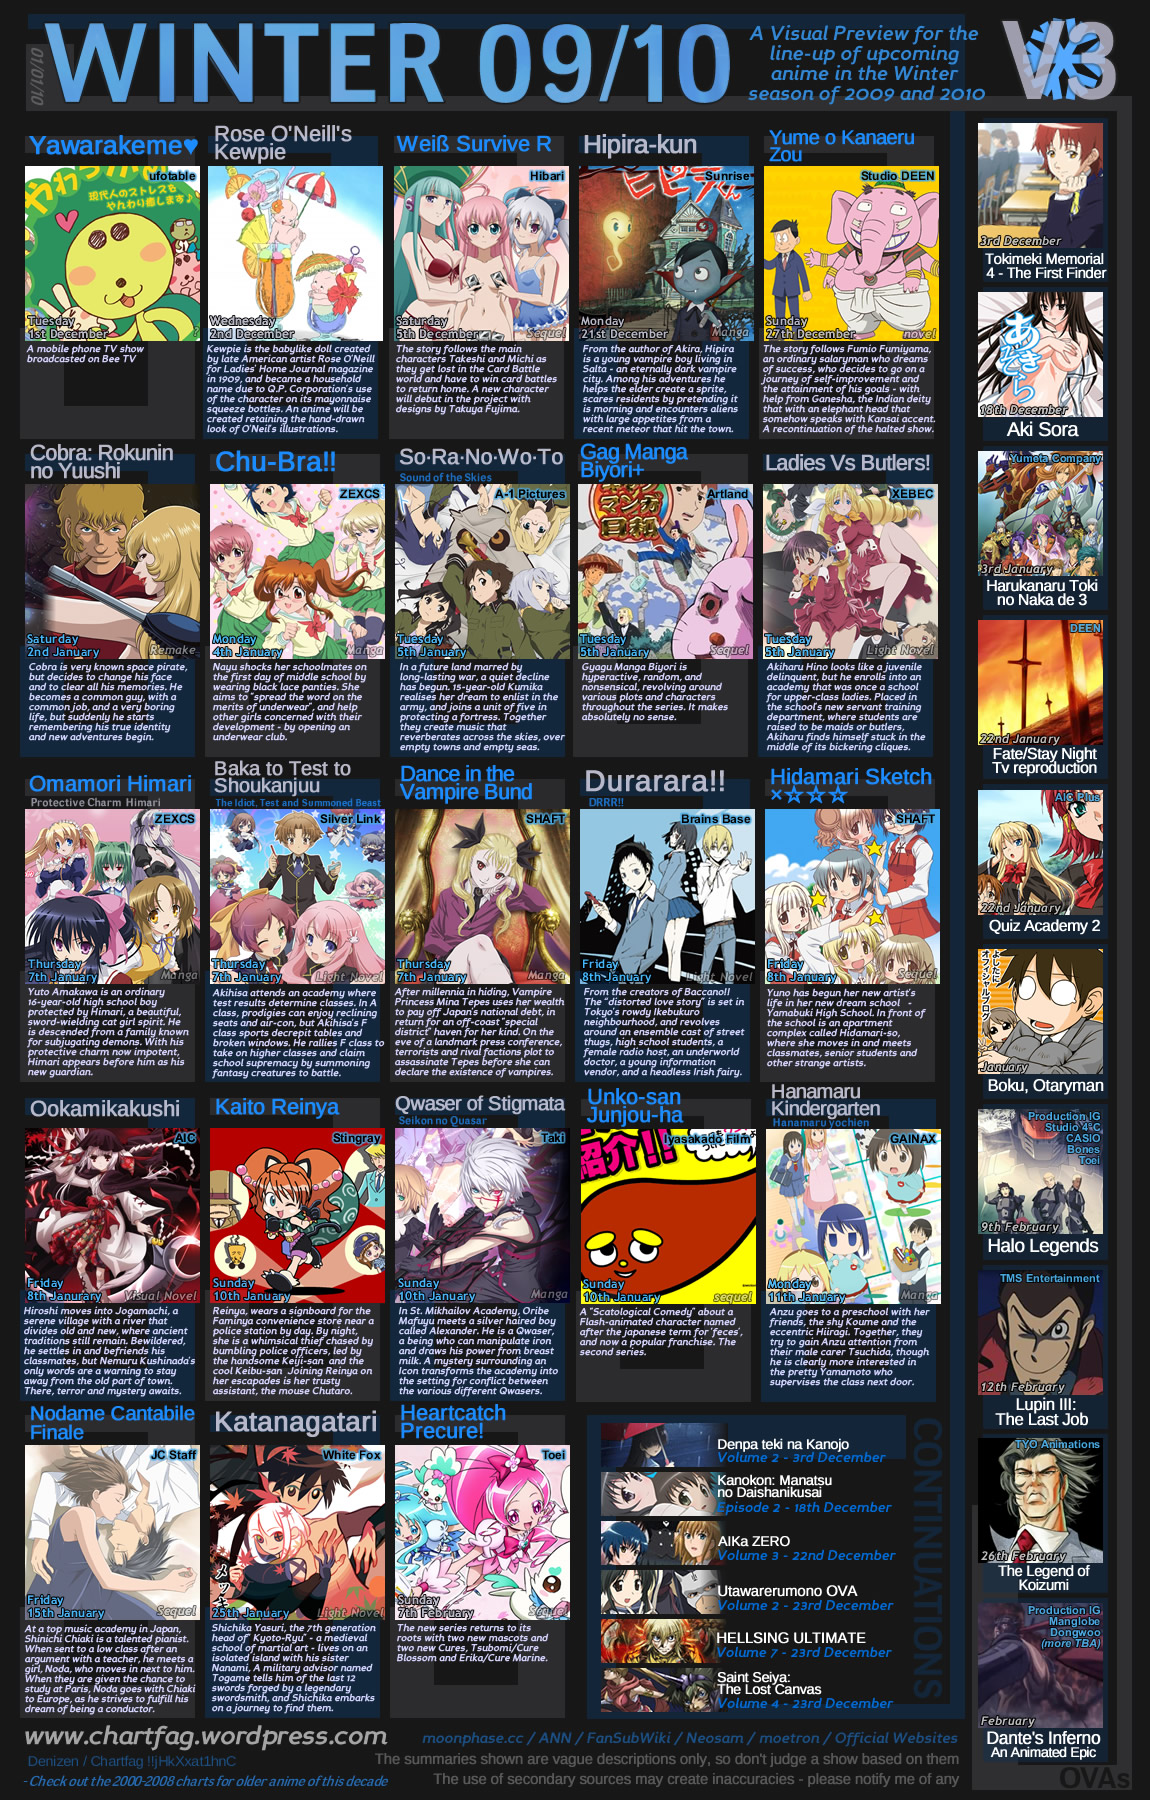 Upcoming Q1 2010 anime  - The Independent Video Game Community